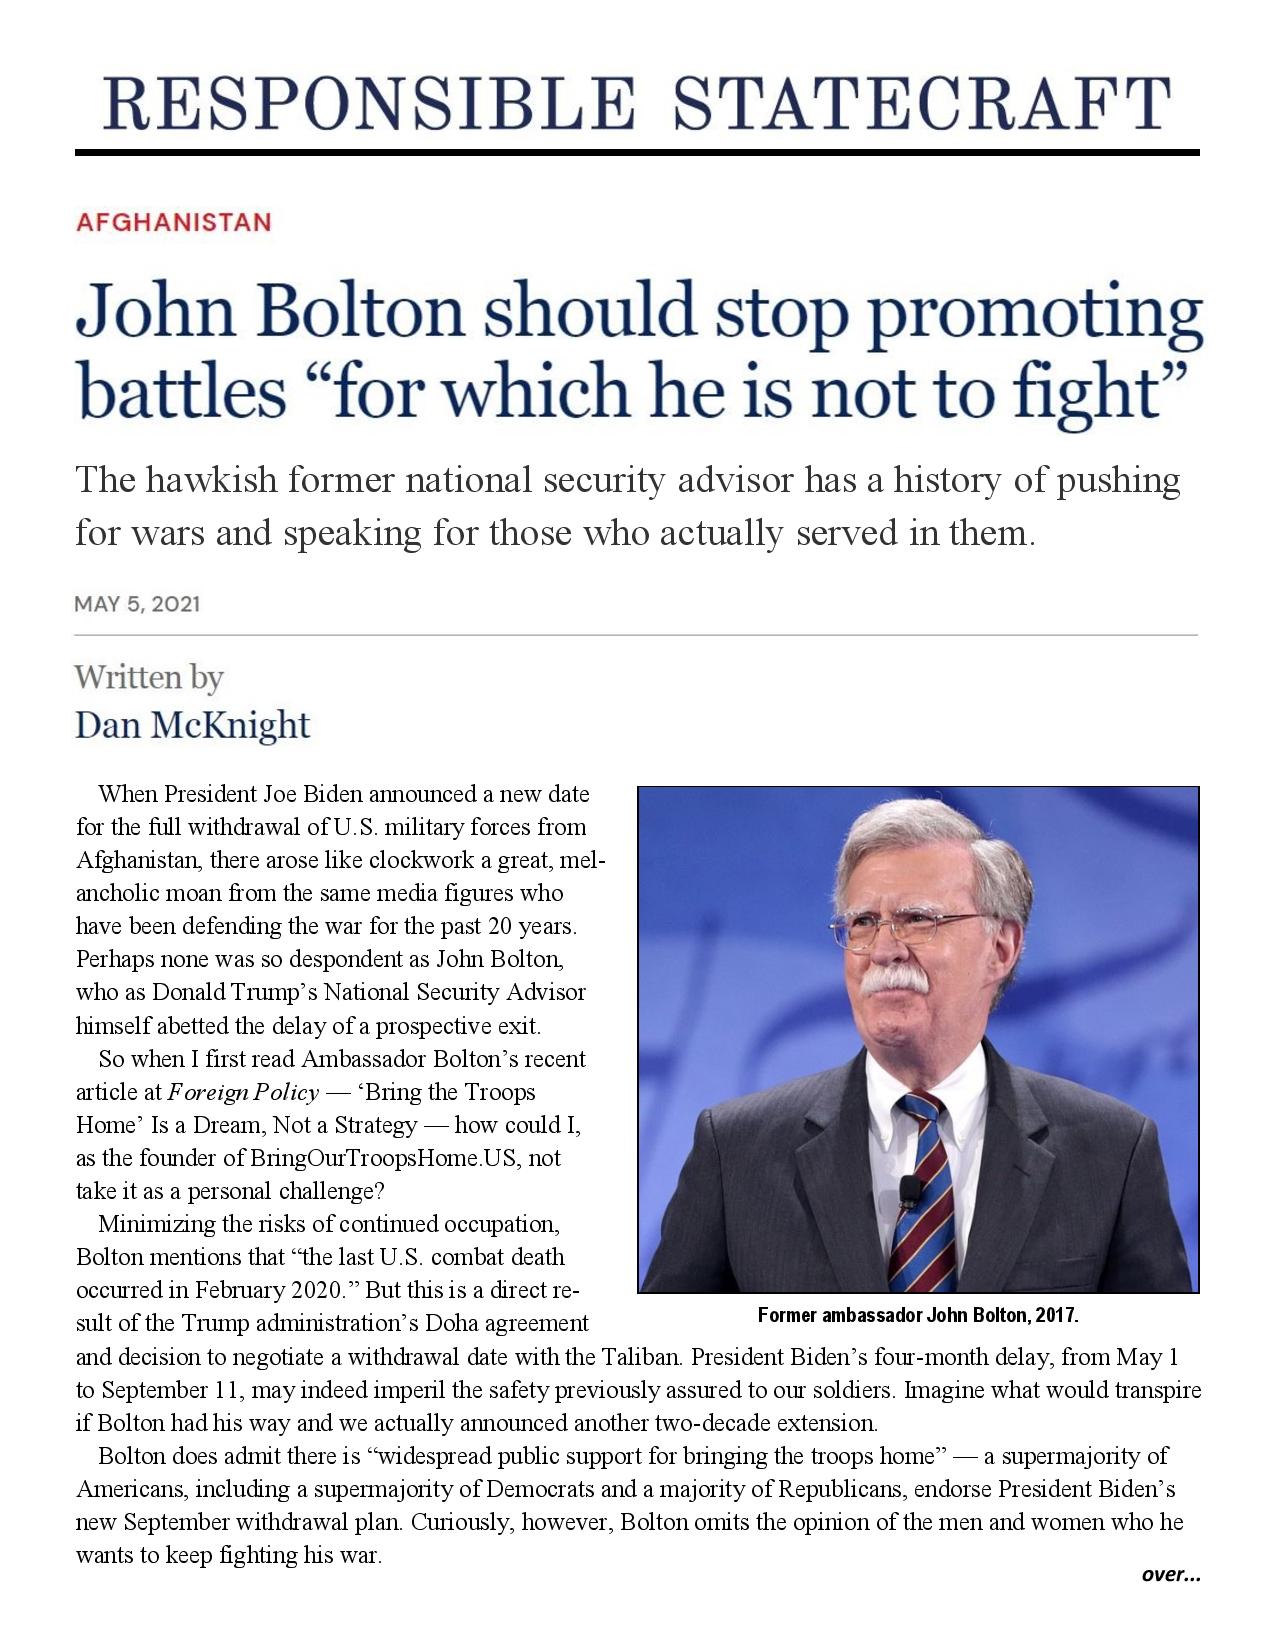 John Bolton Should Stop Promoting Battles “For Which He Is Not to Fight”